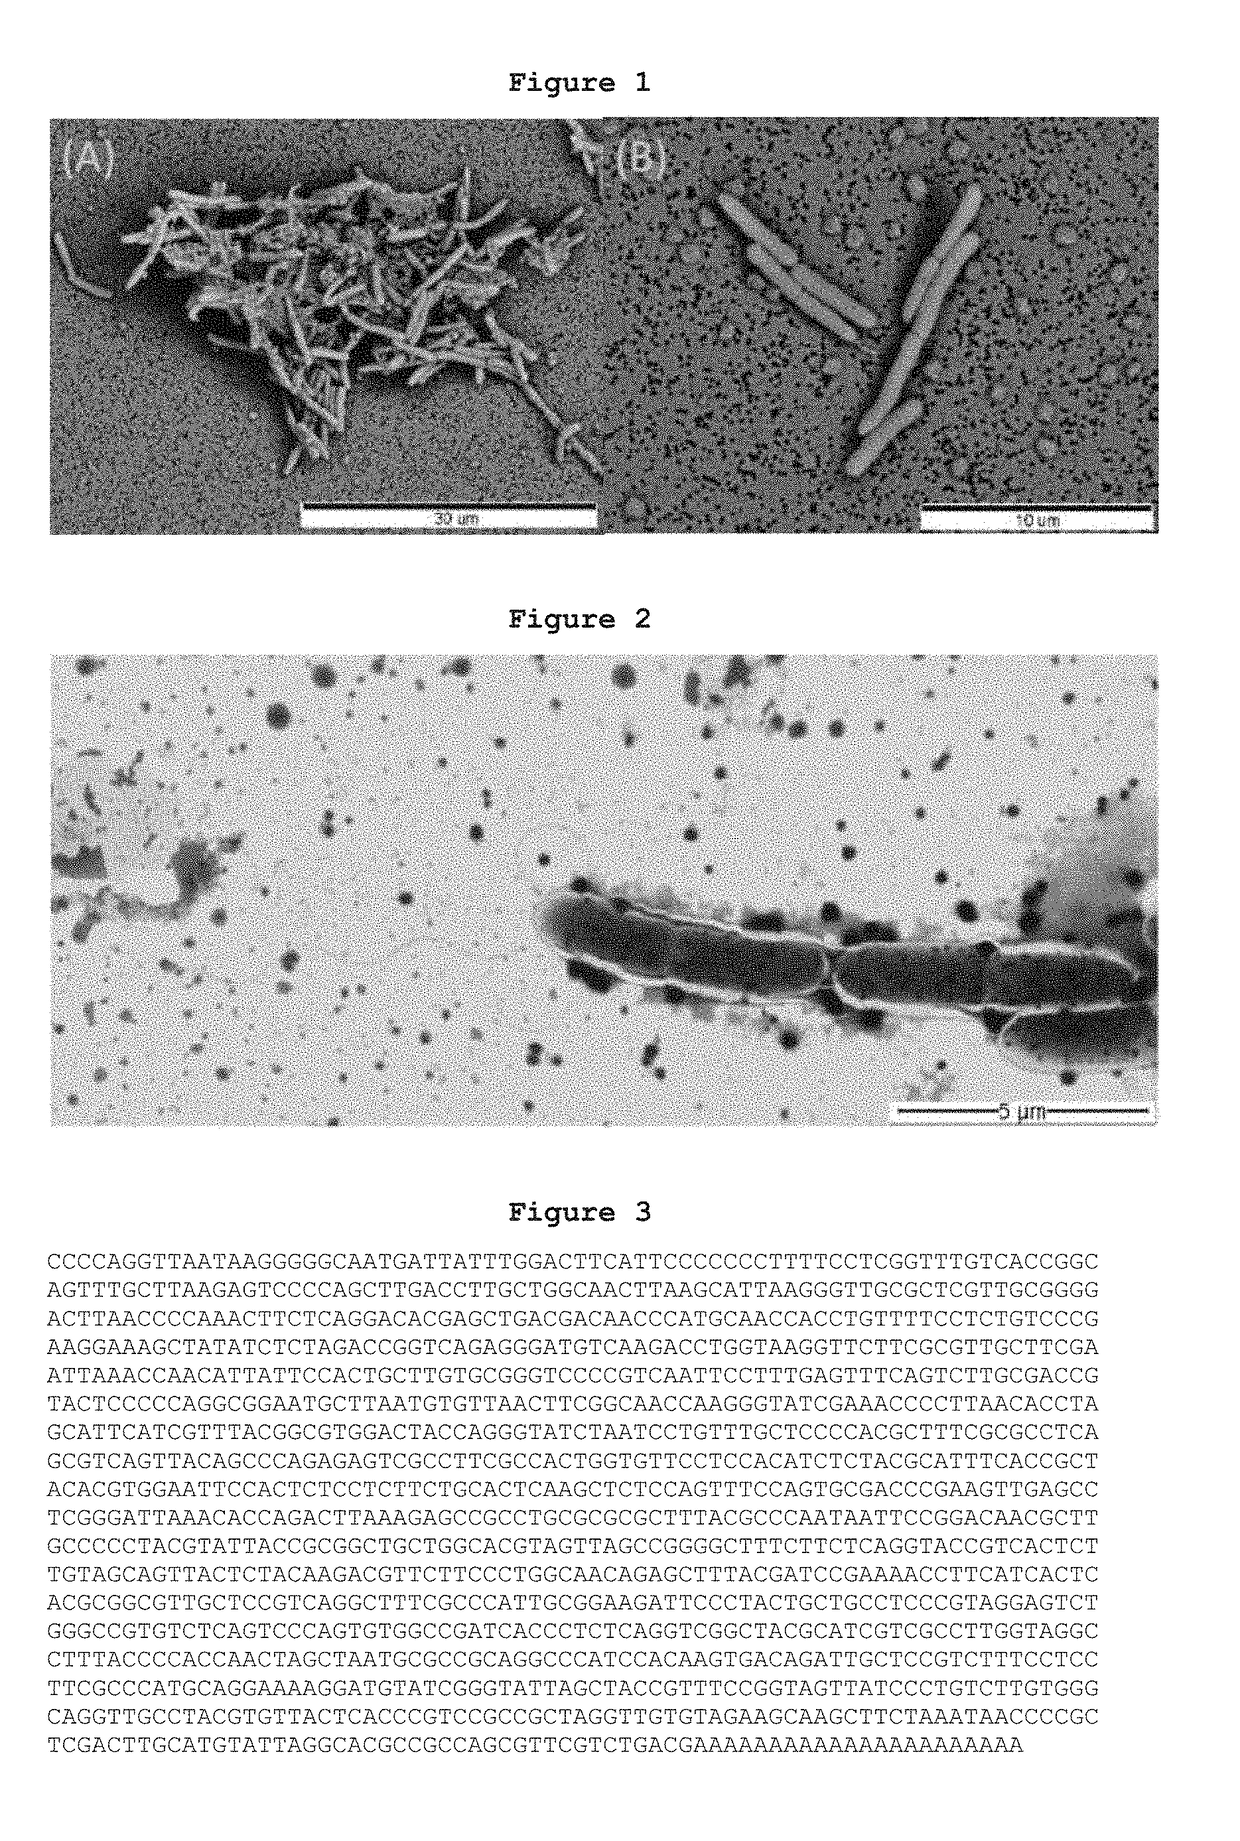 Paenibacillus polymyxa schc 33 bacterial strain, and use thereof to combat phytopathogenic fungi in fruits, vegetables or plants